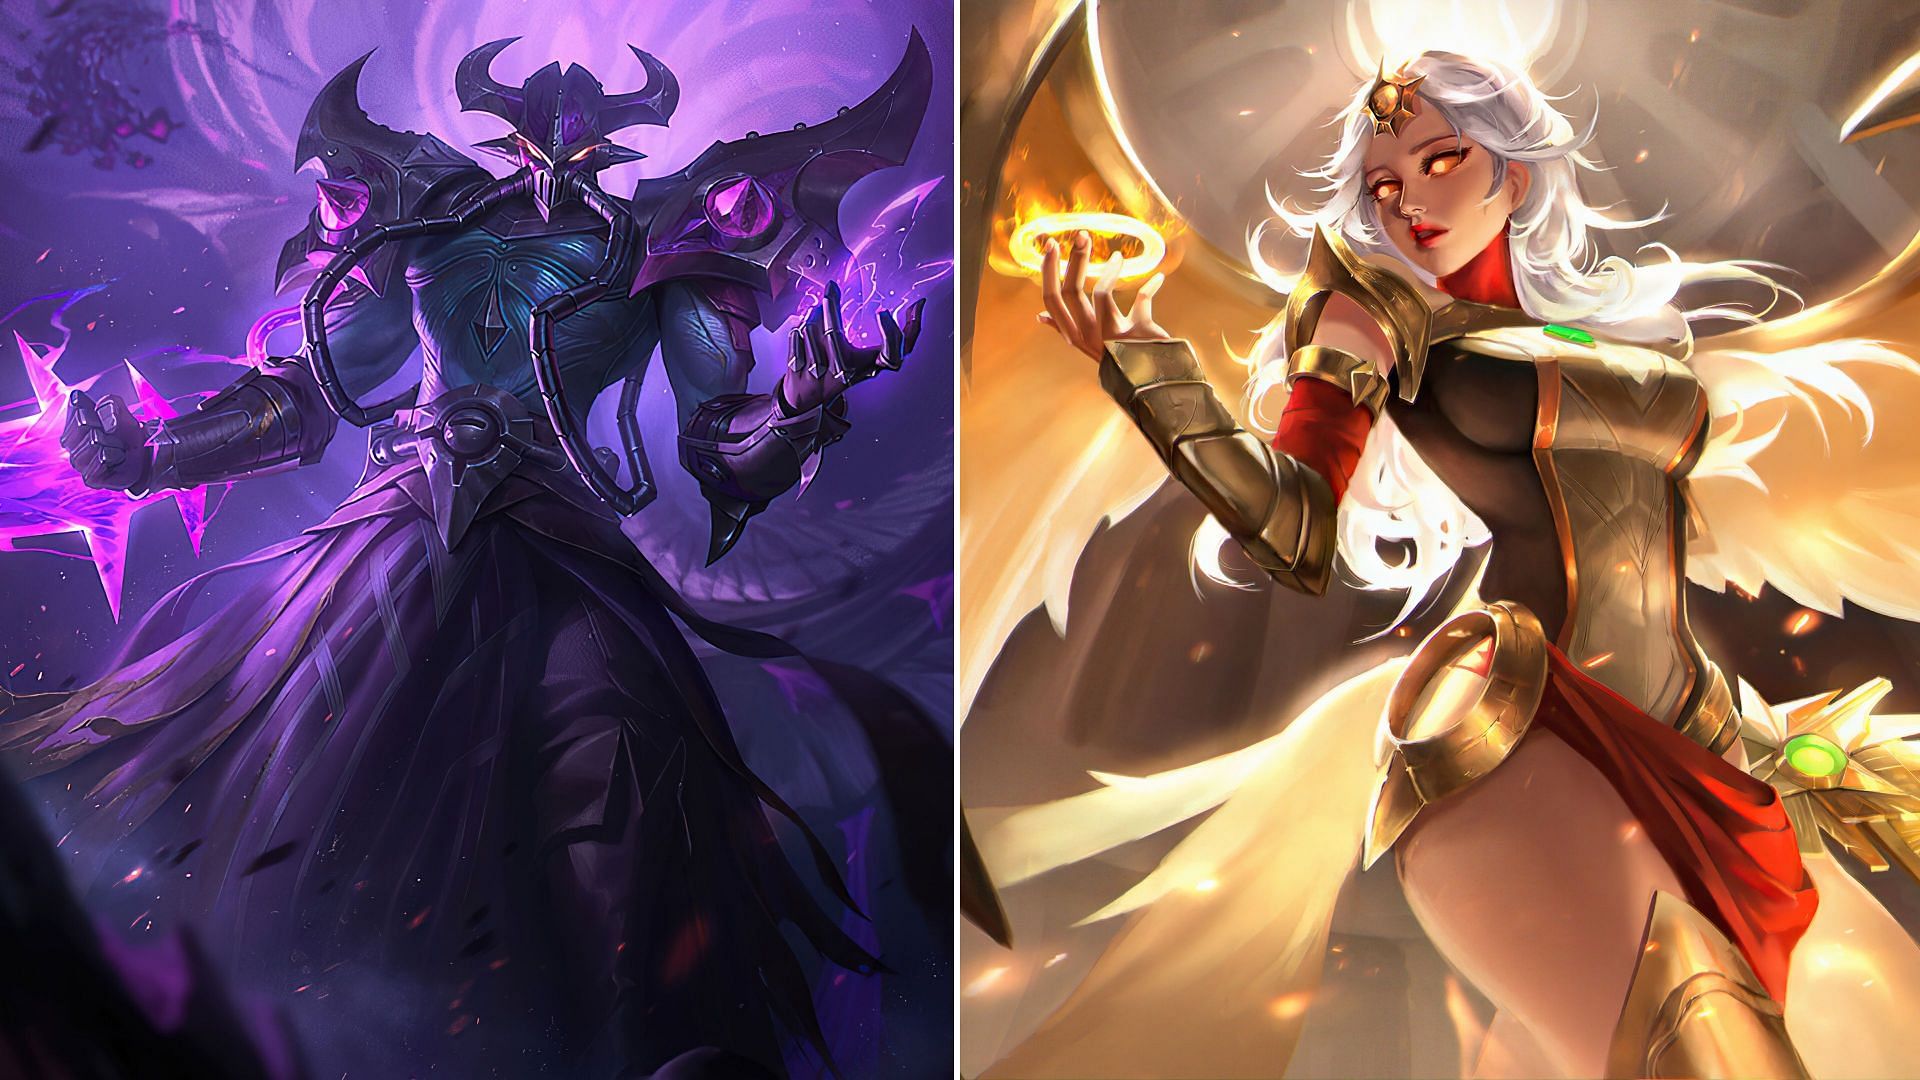 Kassadin and Kayle in League of Legends: Arena (Image via Riot Games)